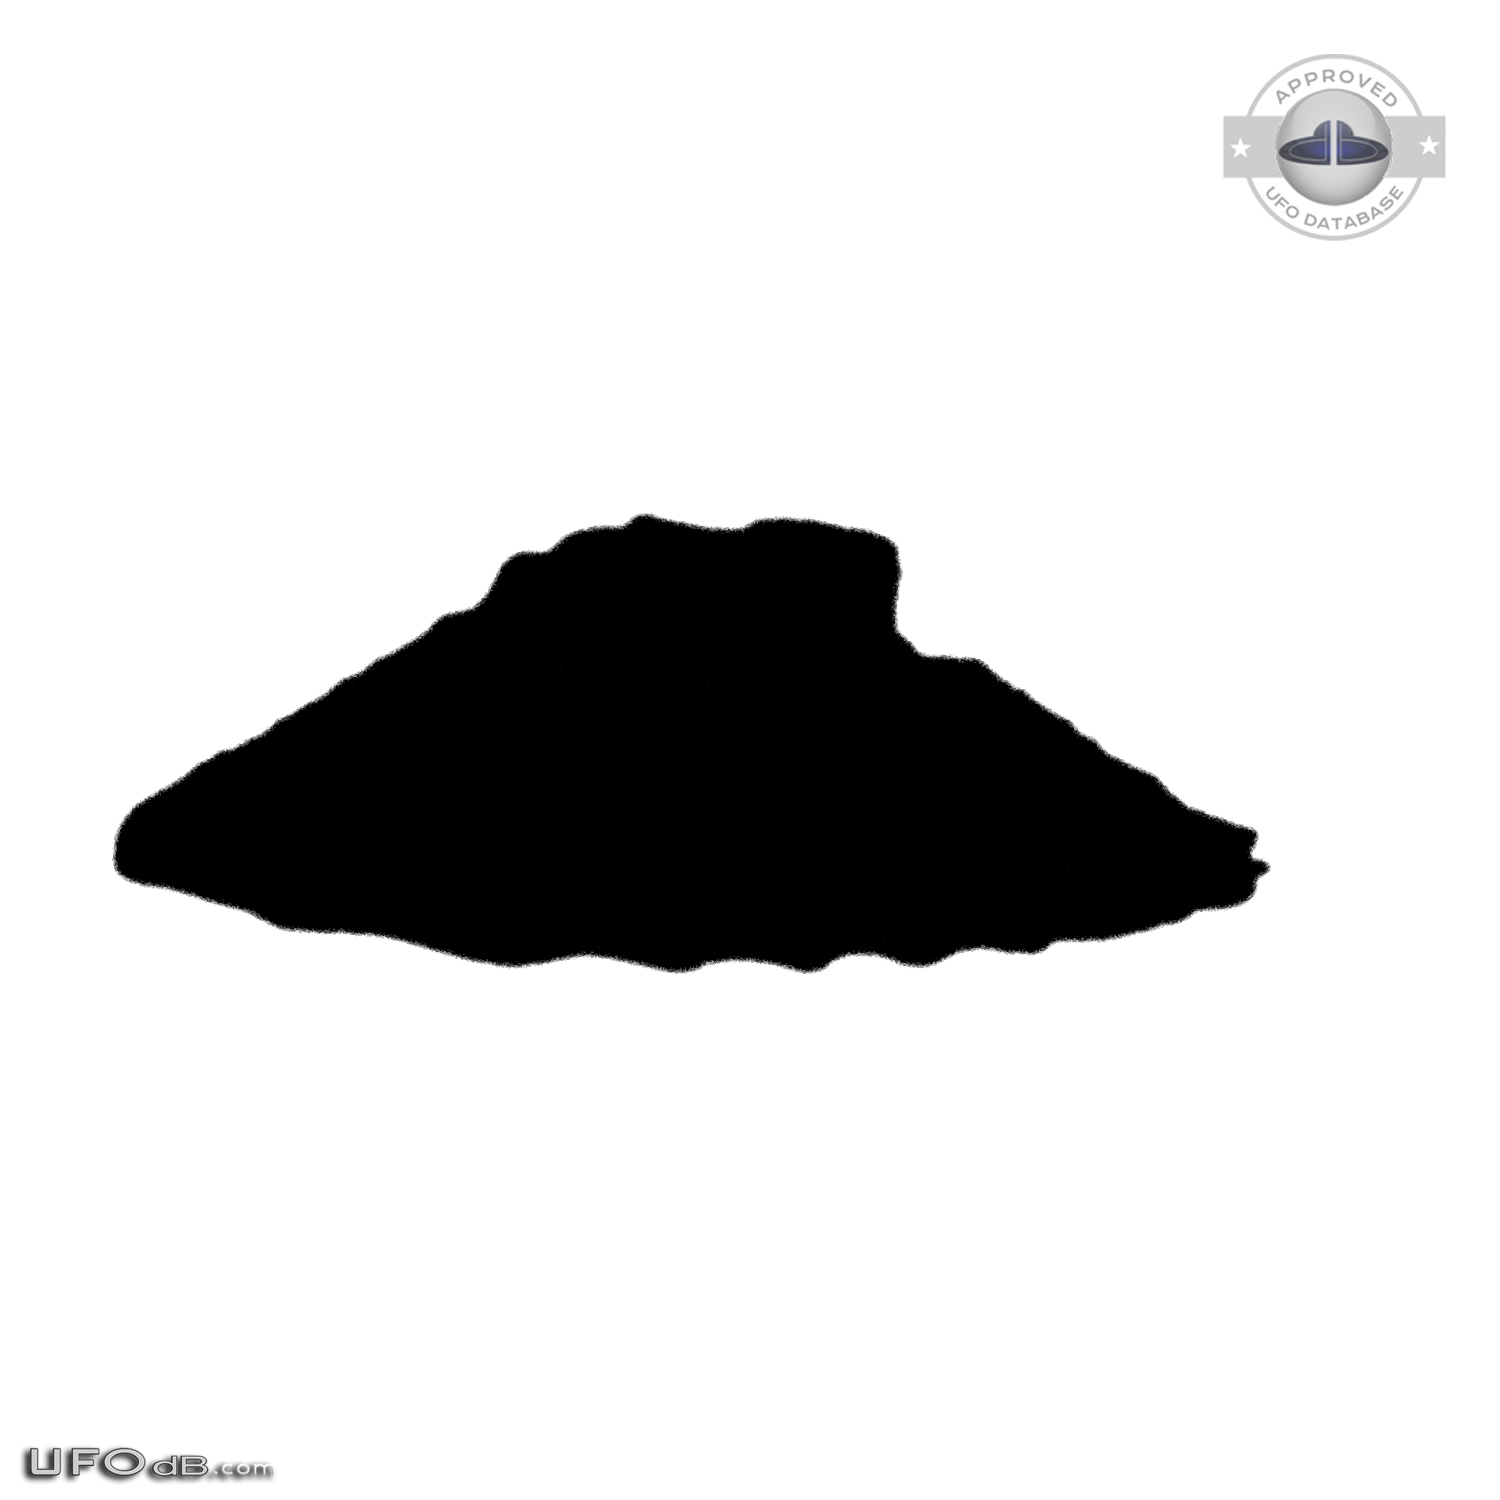 UFO Pictures 2009 UFO over San Diego County California United states. UFO Picture #429-6